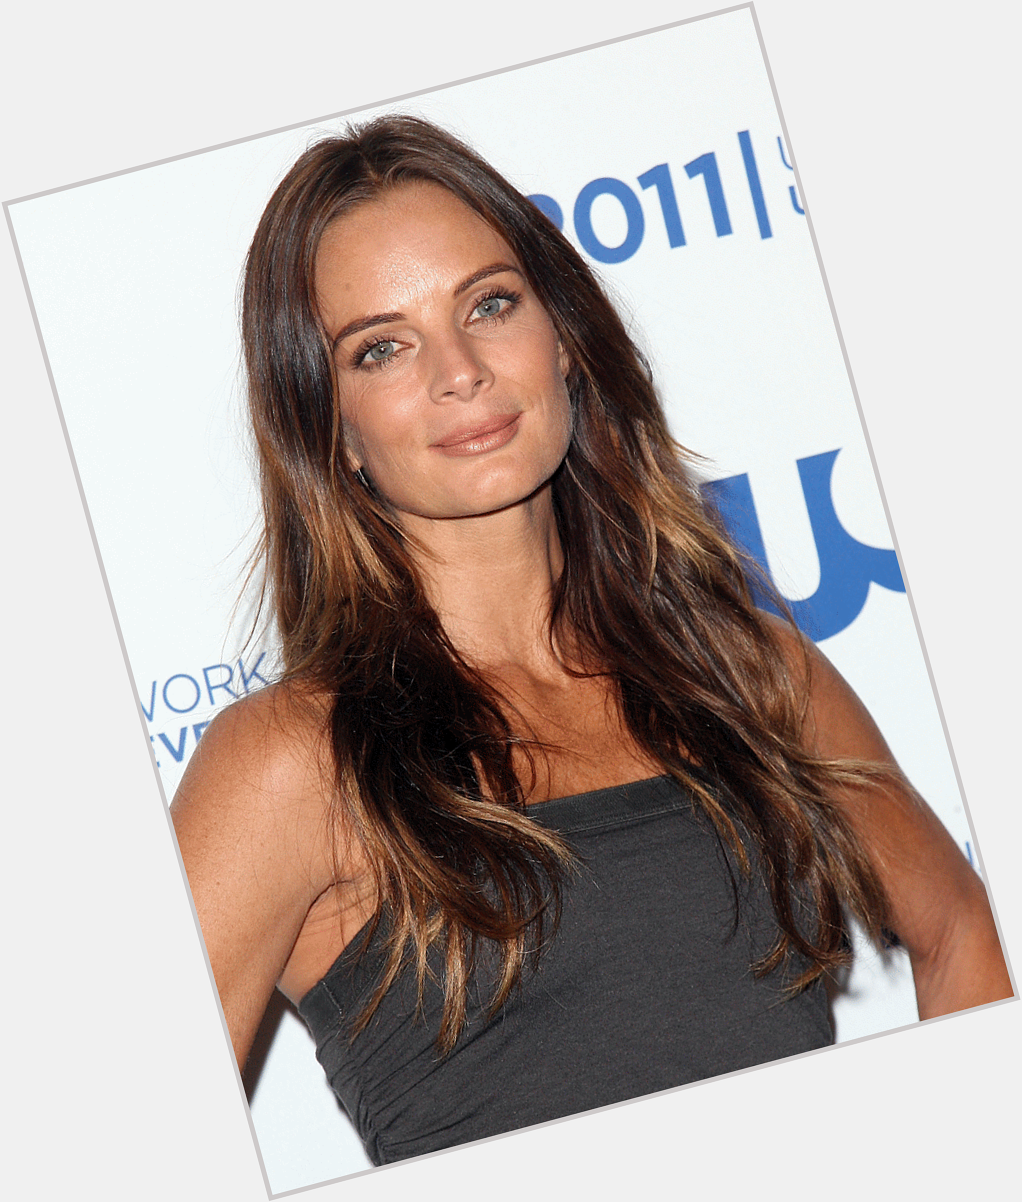 I bet you remember her from \Burn Notice\..Happy birthday, Gabrielle Anwar has her birthday today! 